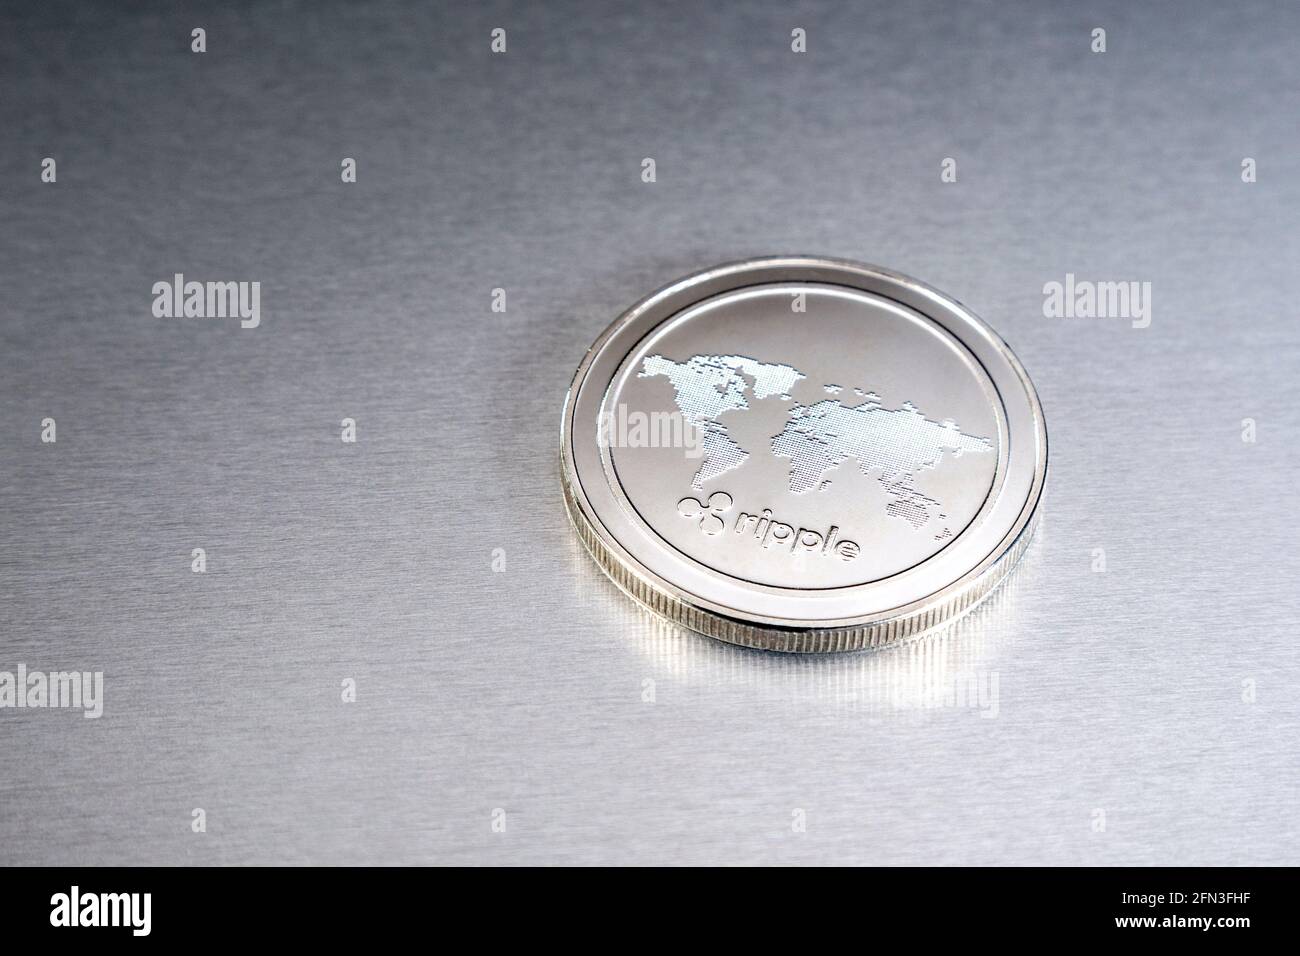 Cryptocurrency Ripple XRP token coin Stock Photo